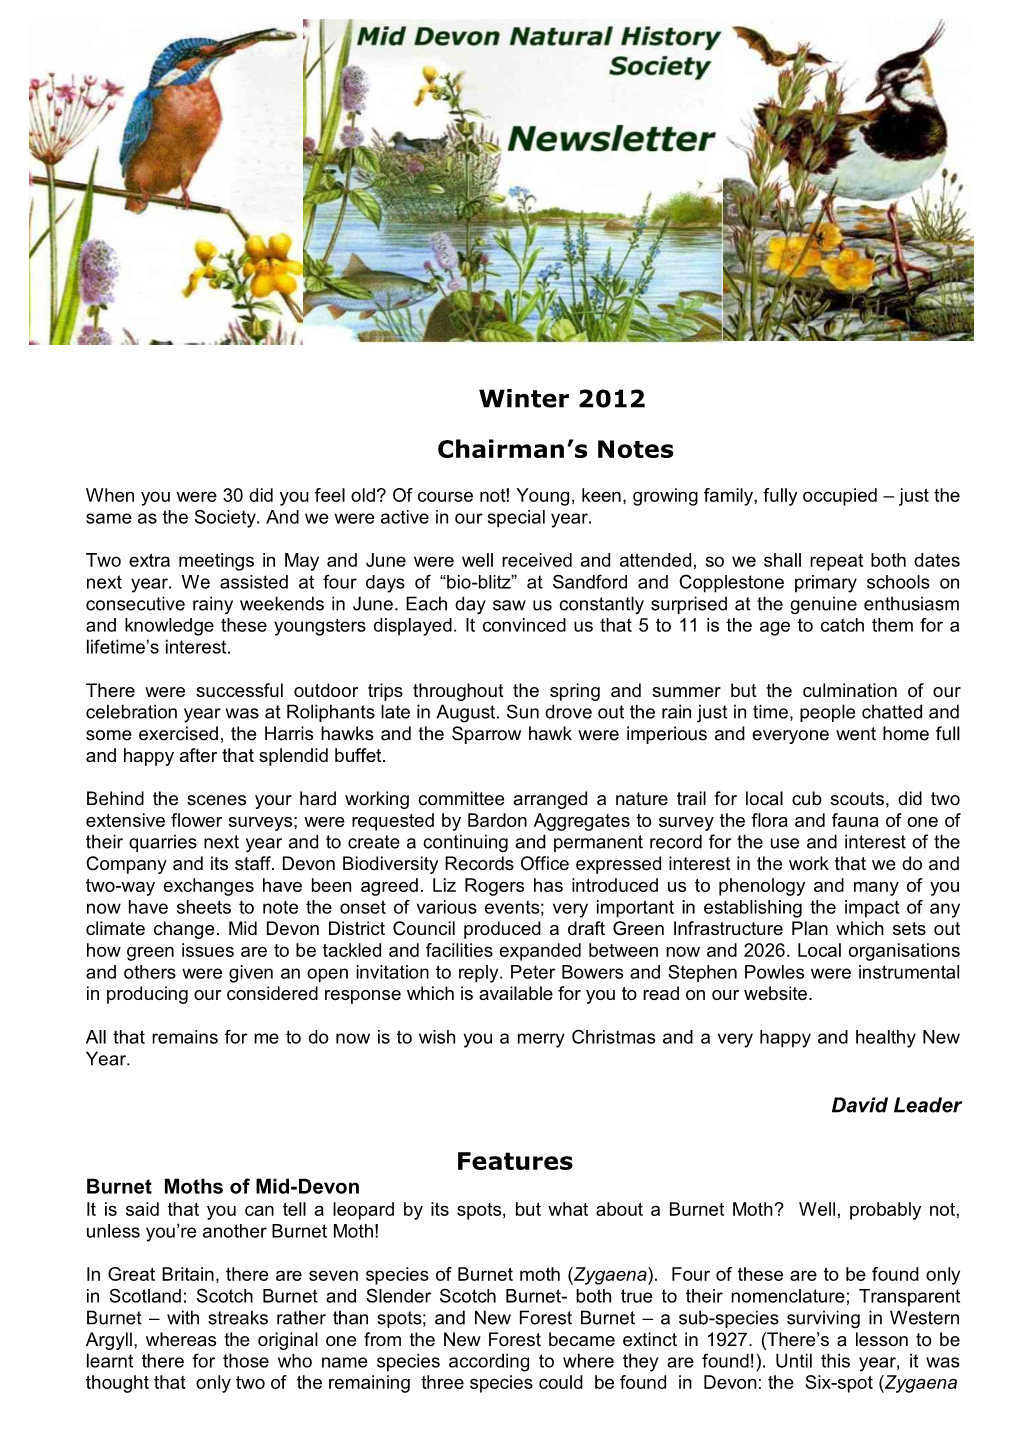 Winter 2012 Chairman's Notes Features